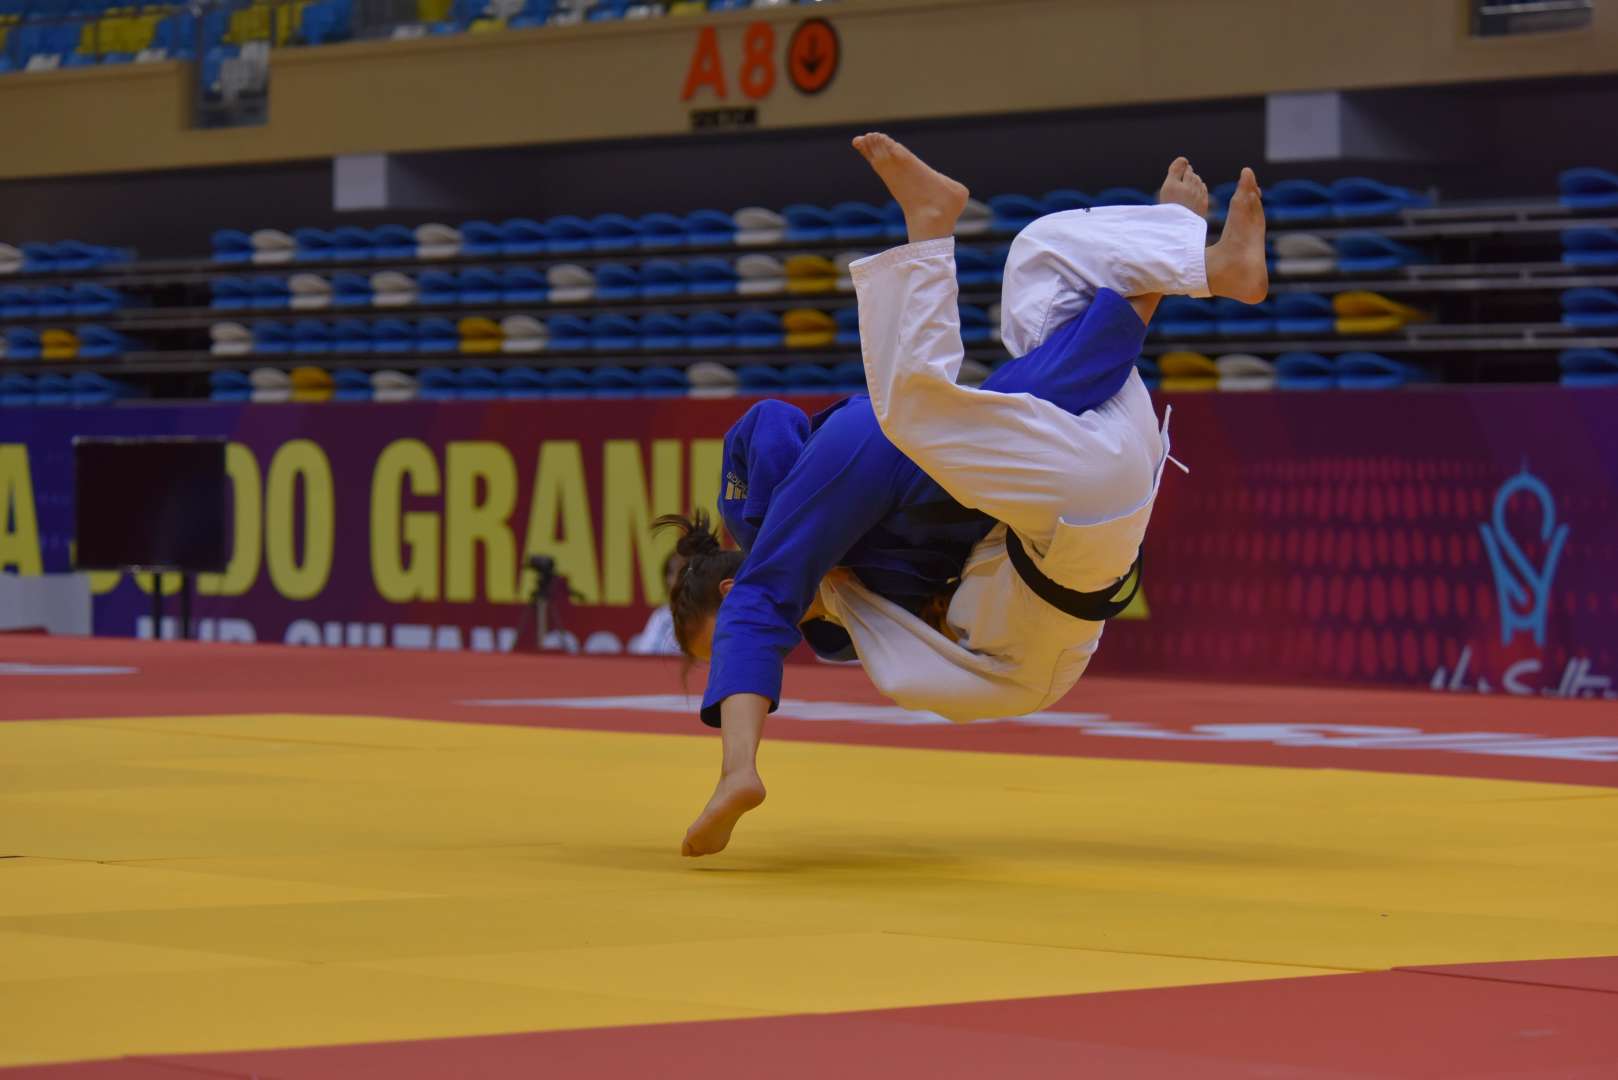 India win first ever medal at the IBSA Judo Grand Prix